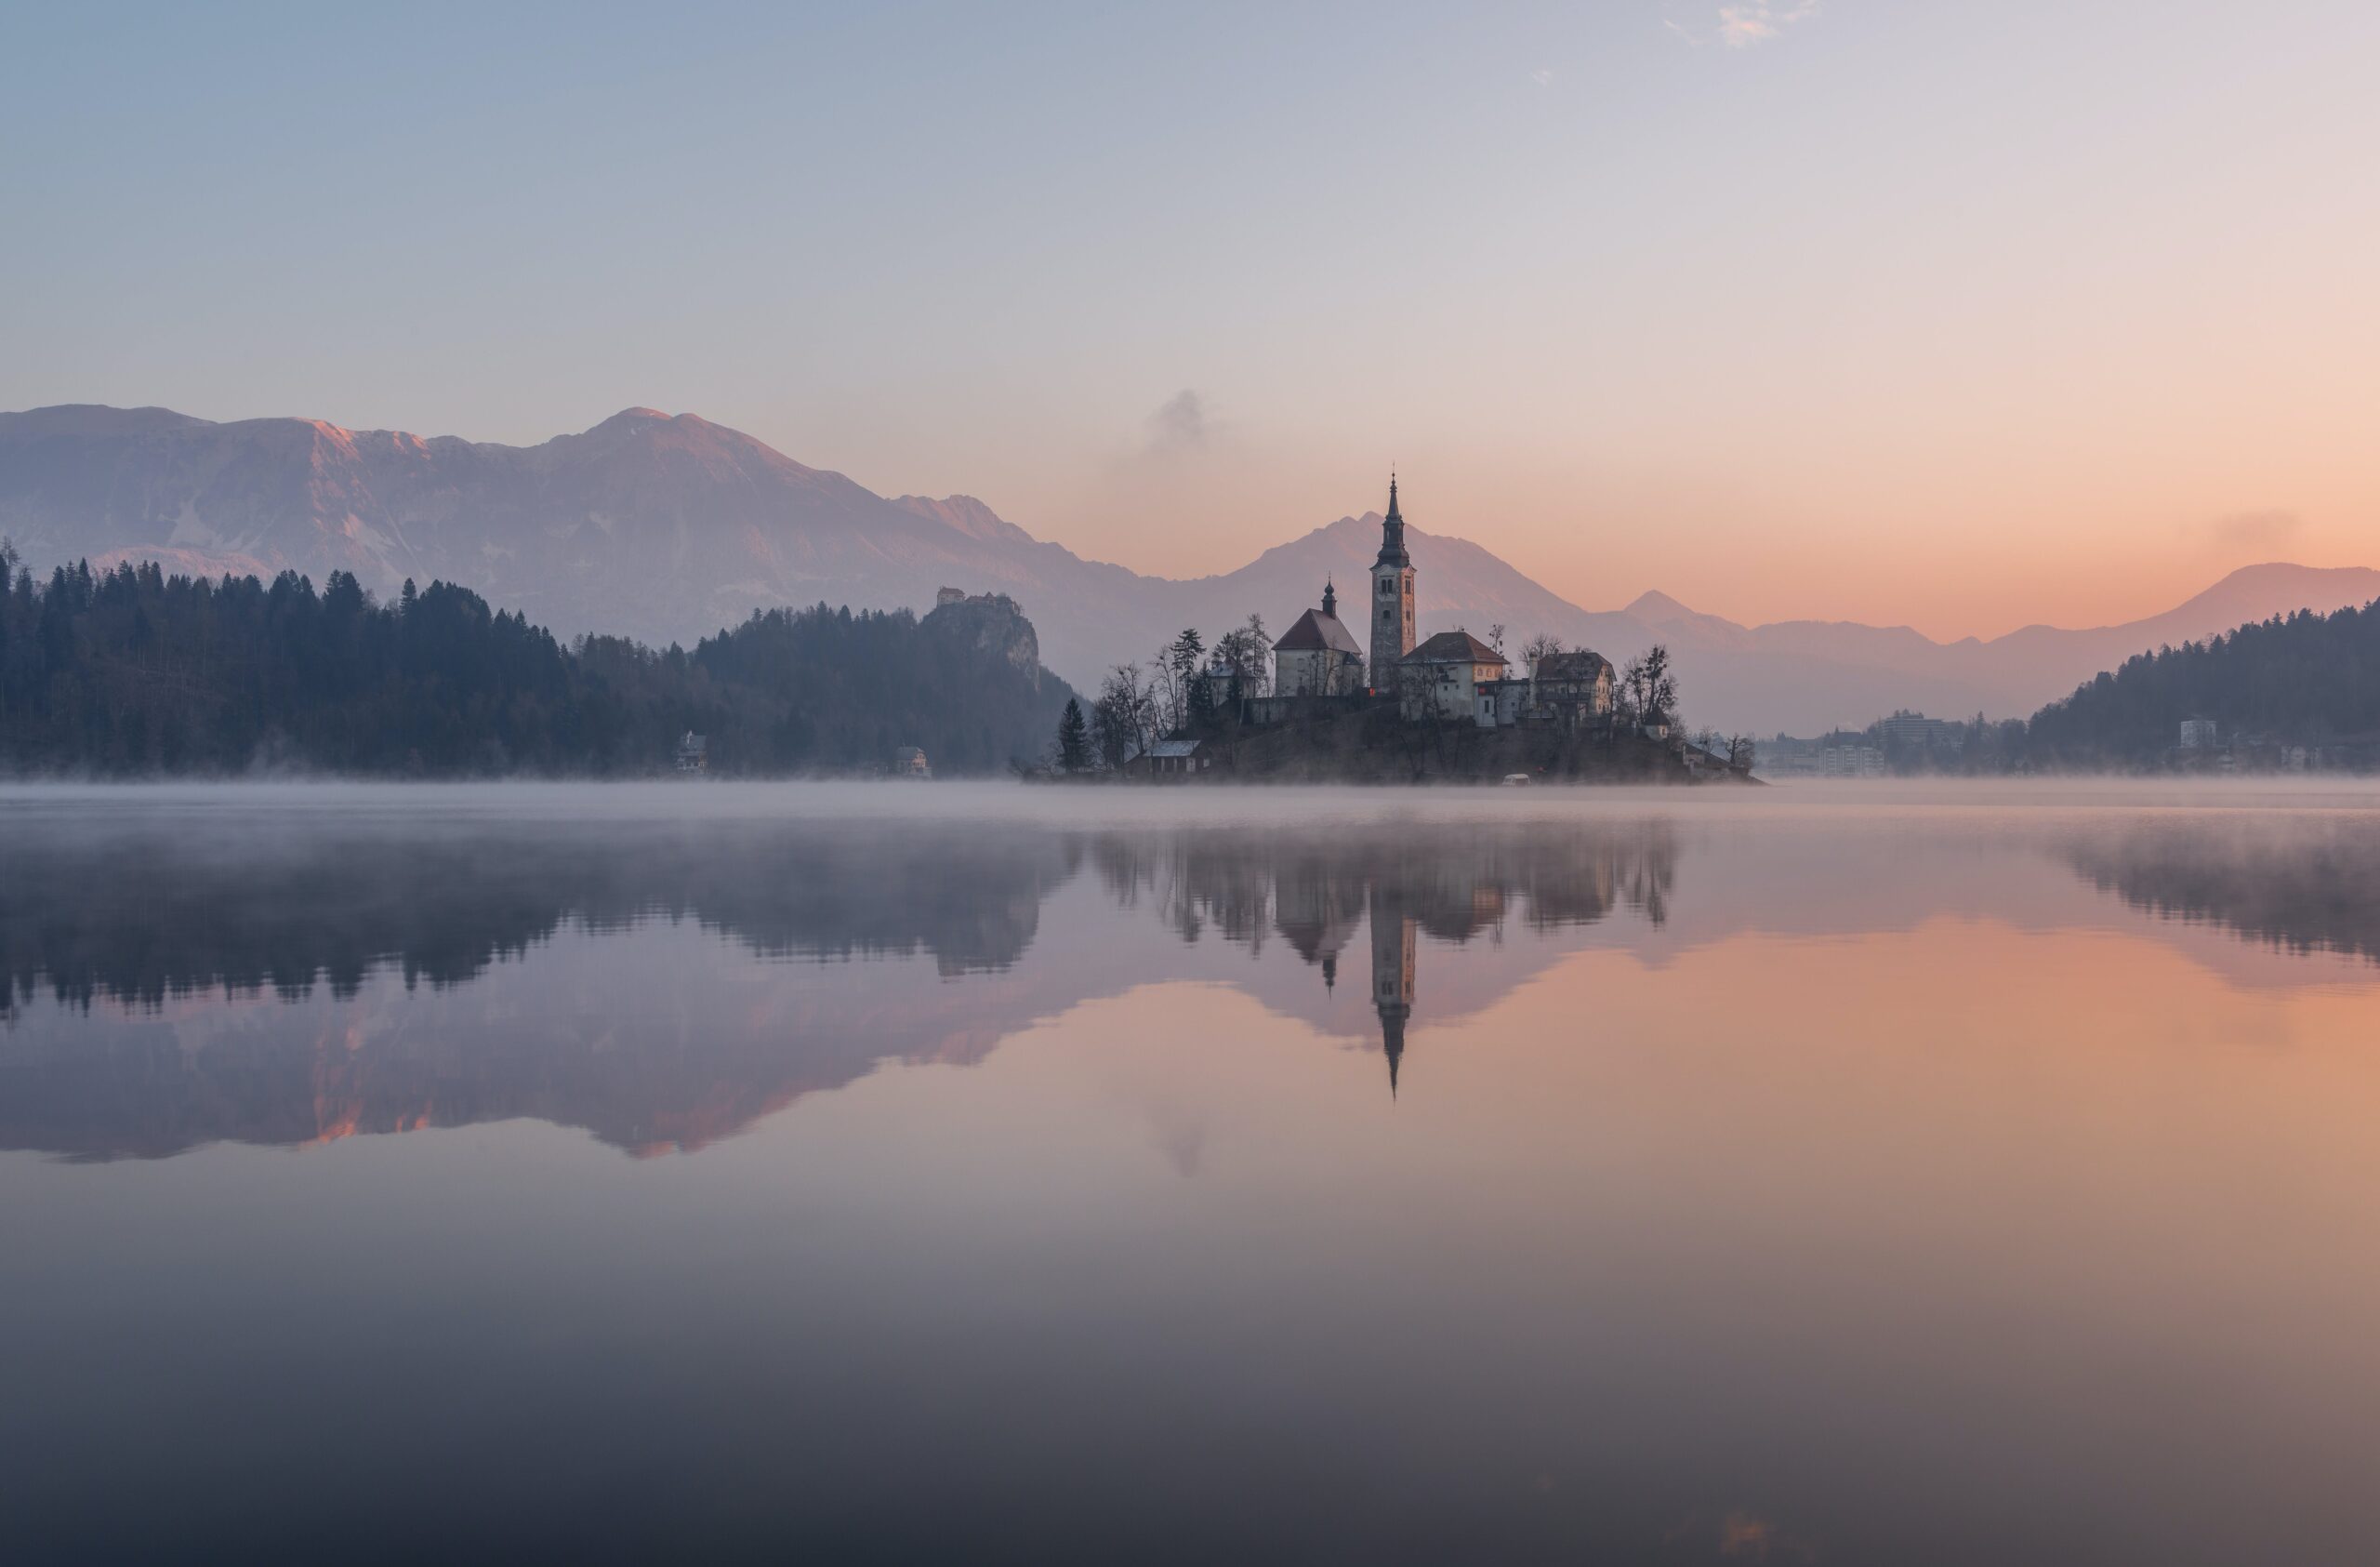 Misty morning at Lake Bled, Slovenia, a picturesque budget-friendly winter locale for college travelers.